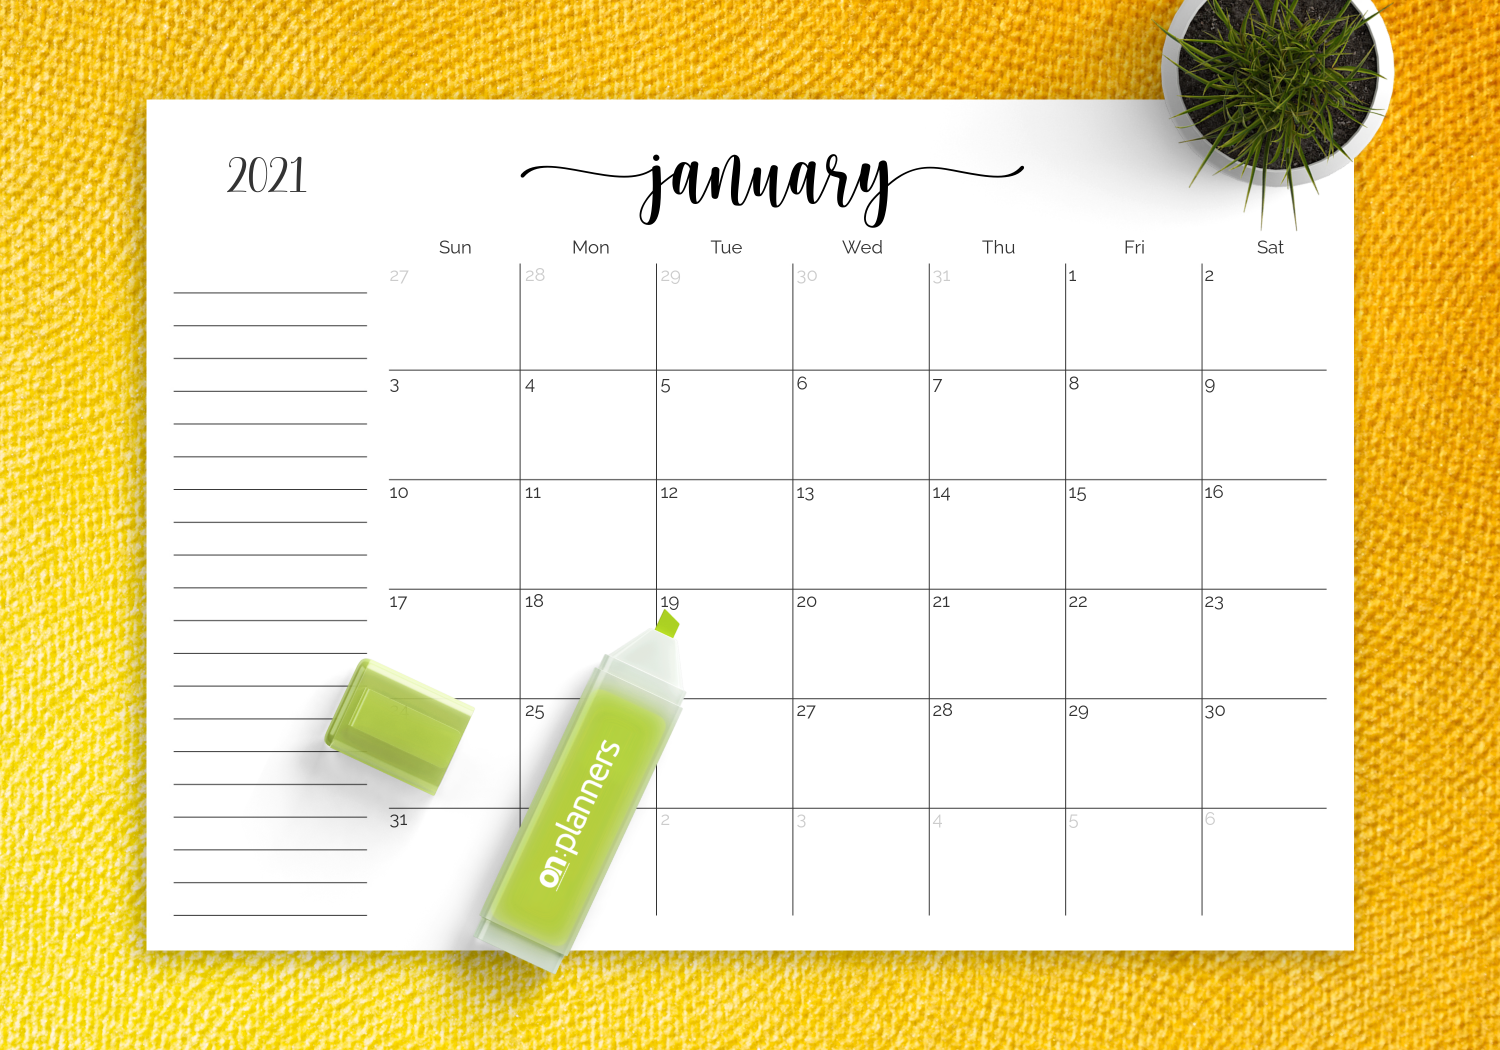 printable blank monthly calendar with notes free by 123freevectors on